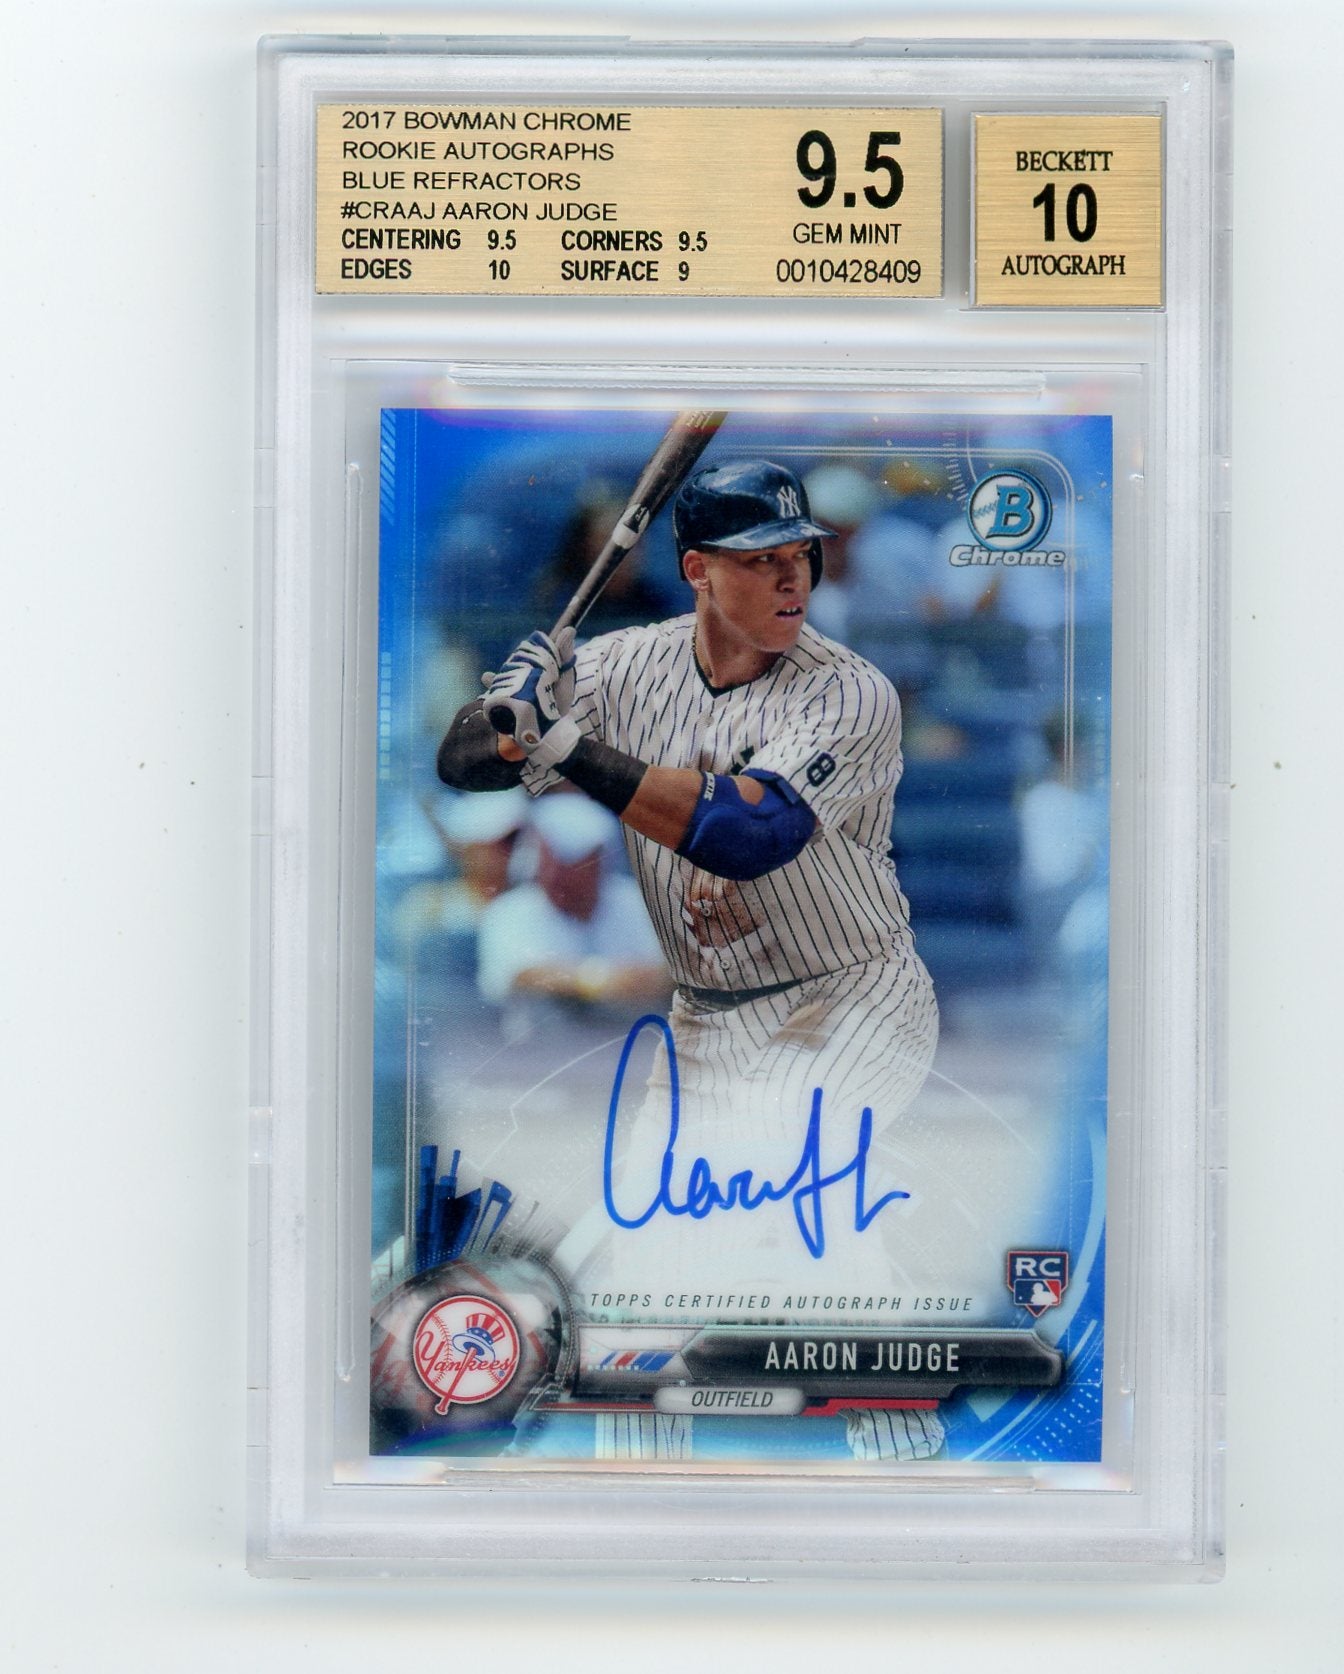 2017 Bowman Chrome Aaron Judge Rookie Card BGS 10 - $1150 - Blowout Cards  Forums